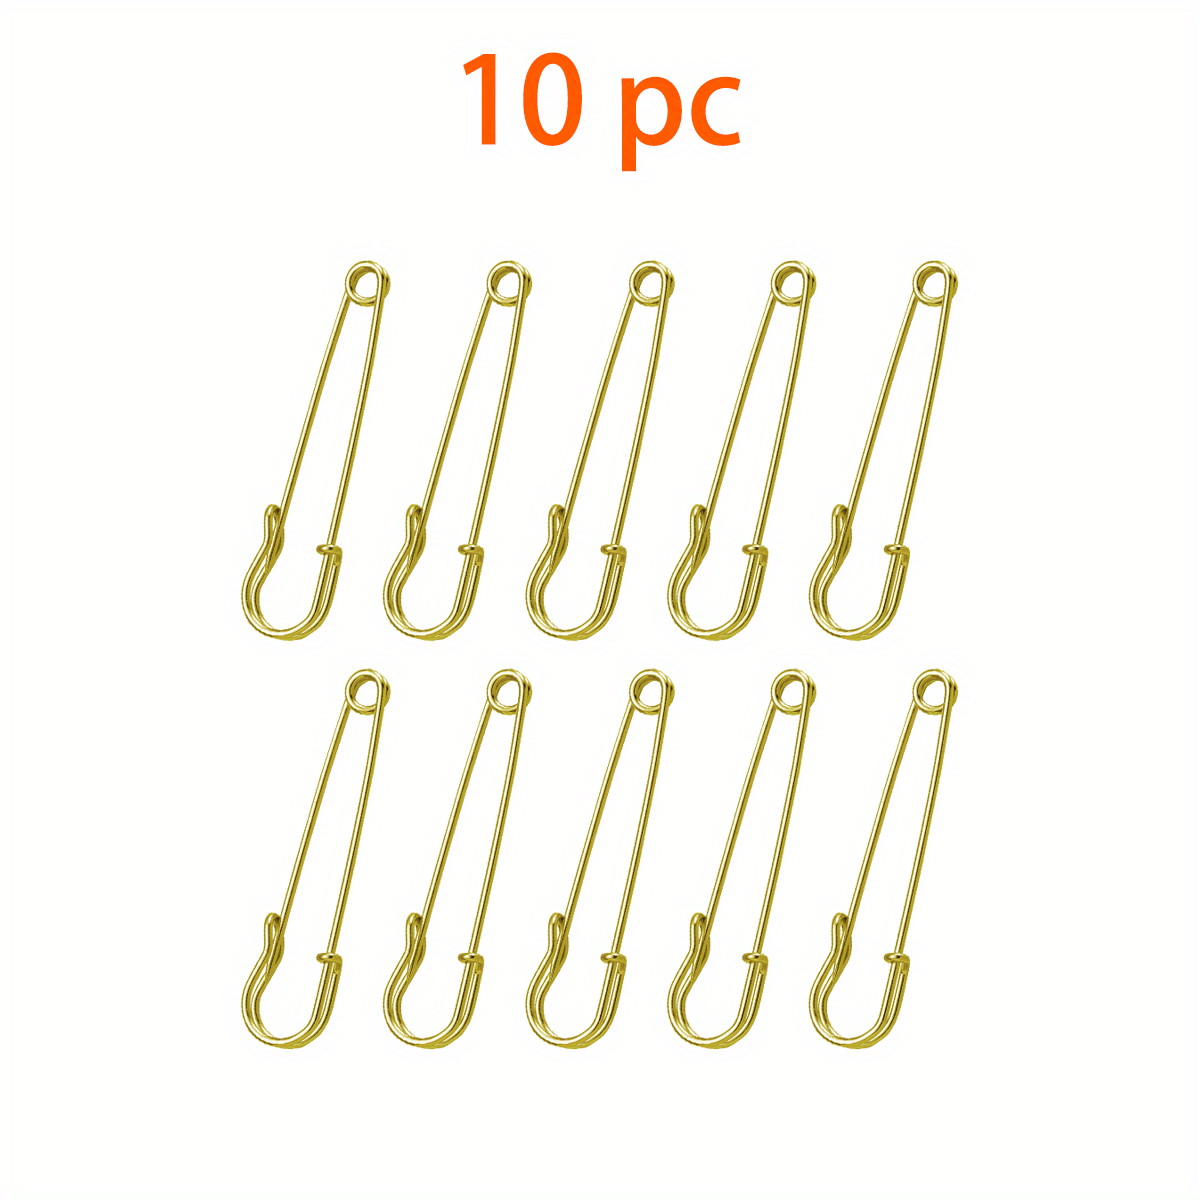 Jumbo Safety Pins / 5 Pieces Gold Large Safety Pins/ 2.75 Mix and Match  Colors/ Giant Safety Pins/ Great for Storing Zippers HR051 